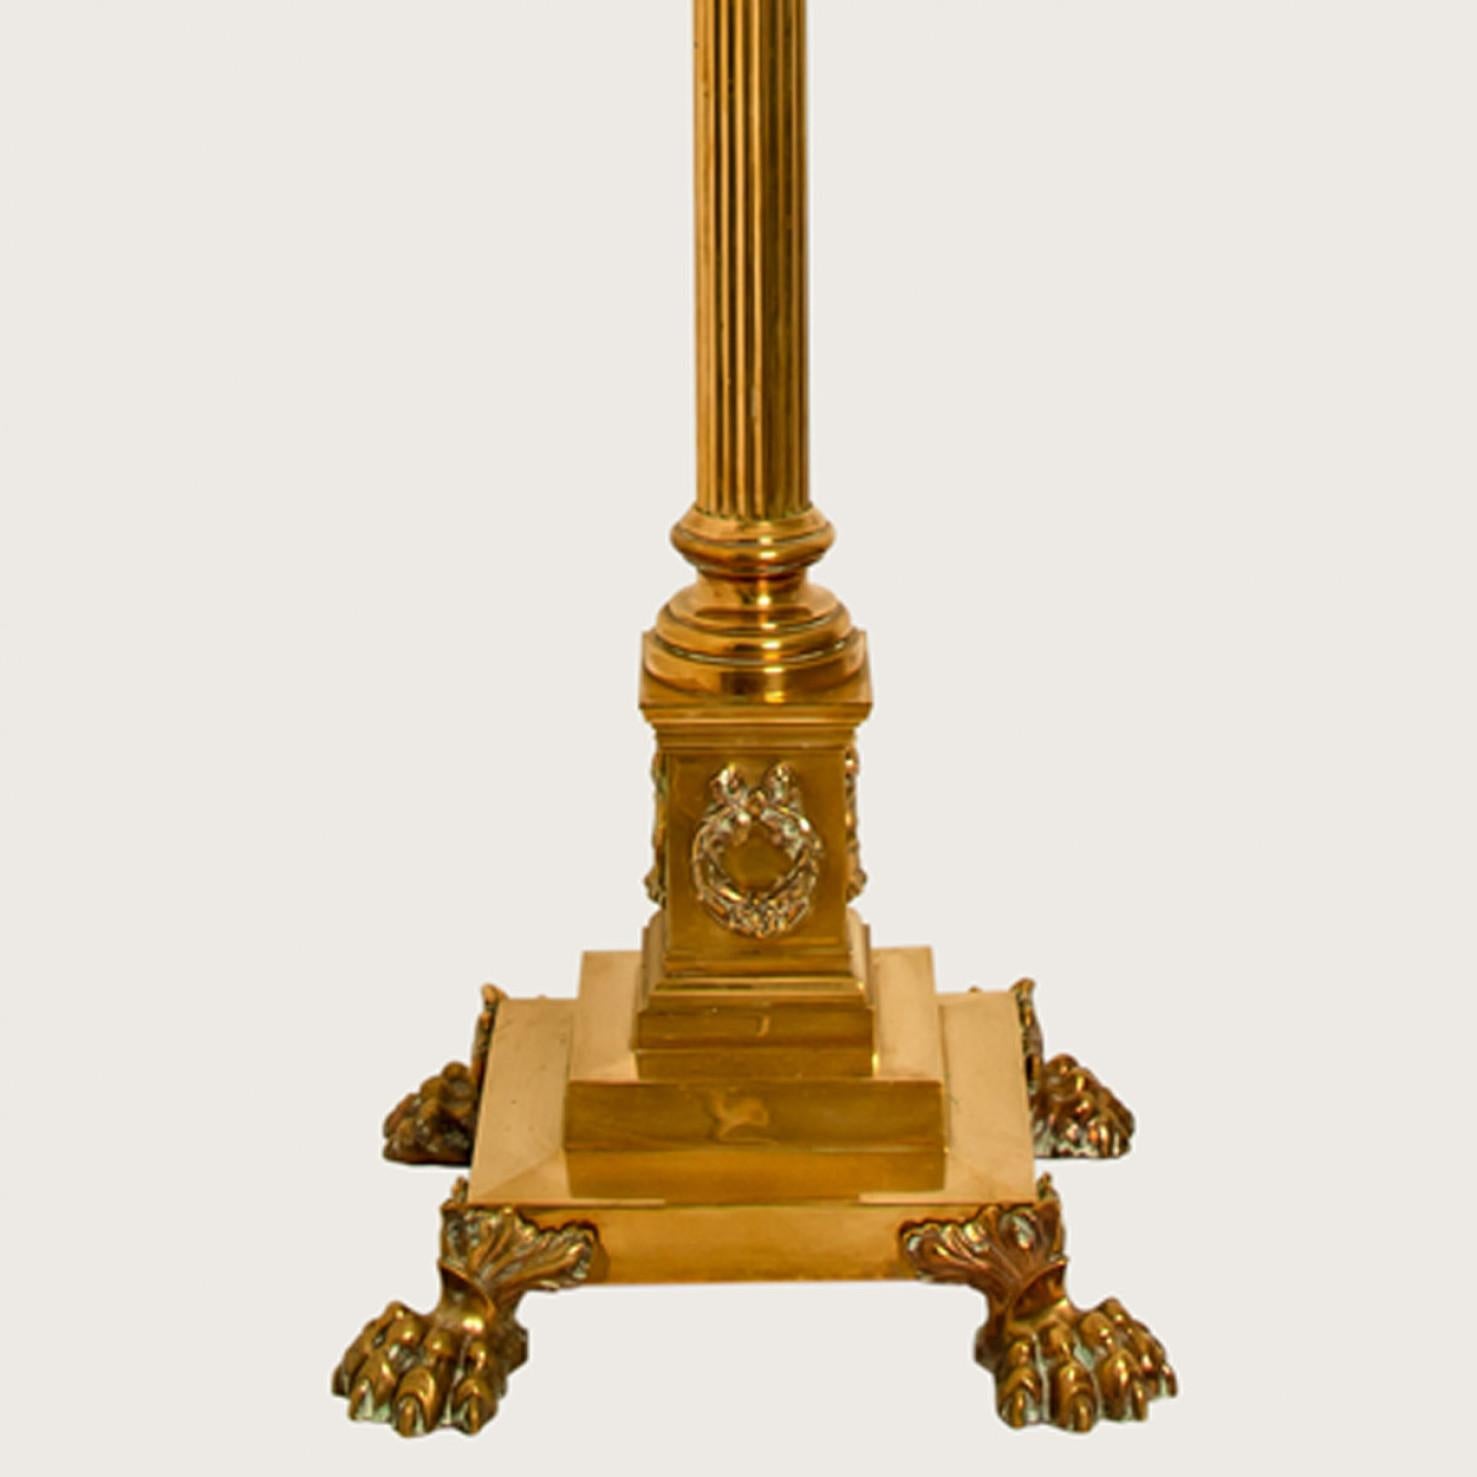 Antique Corinthian Column Brass Floor Lamp with Fringed Lampshade, England, 1890 For Sale 4